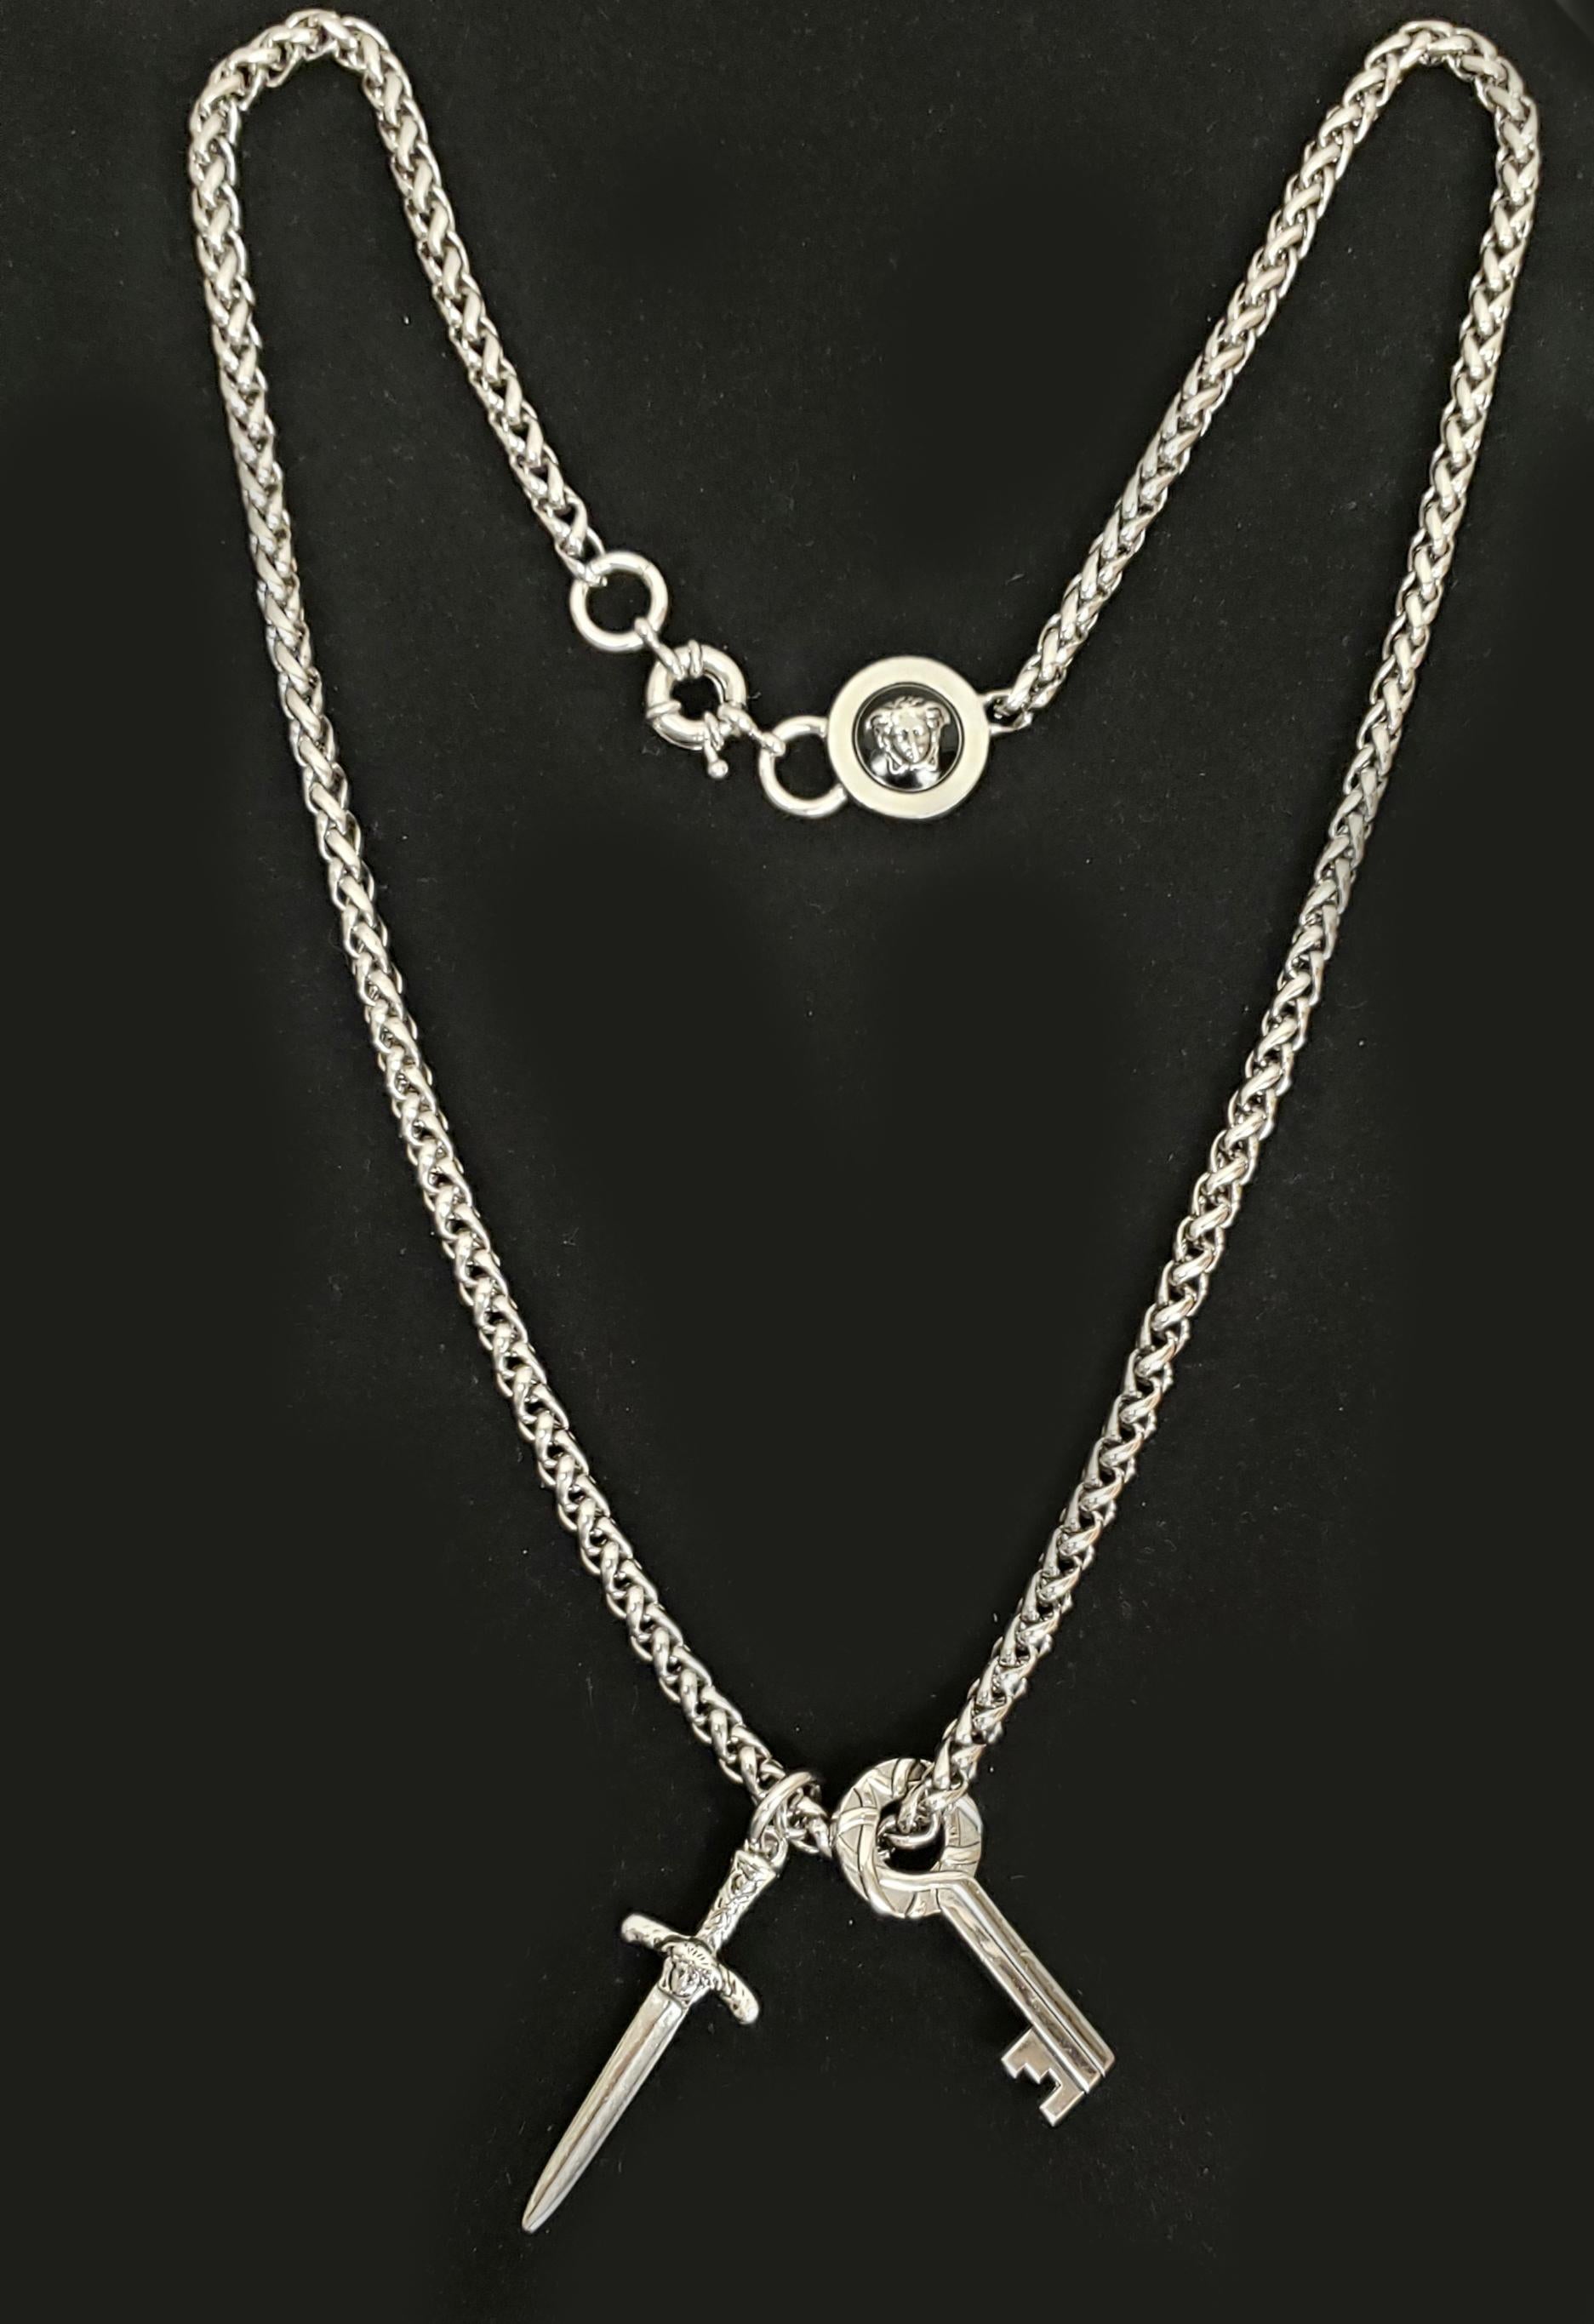 Women's or Men's Spring 2011 L# 43 NEW VERSACE SILVER TONE METAL CHAIN For Sale